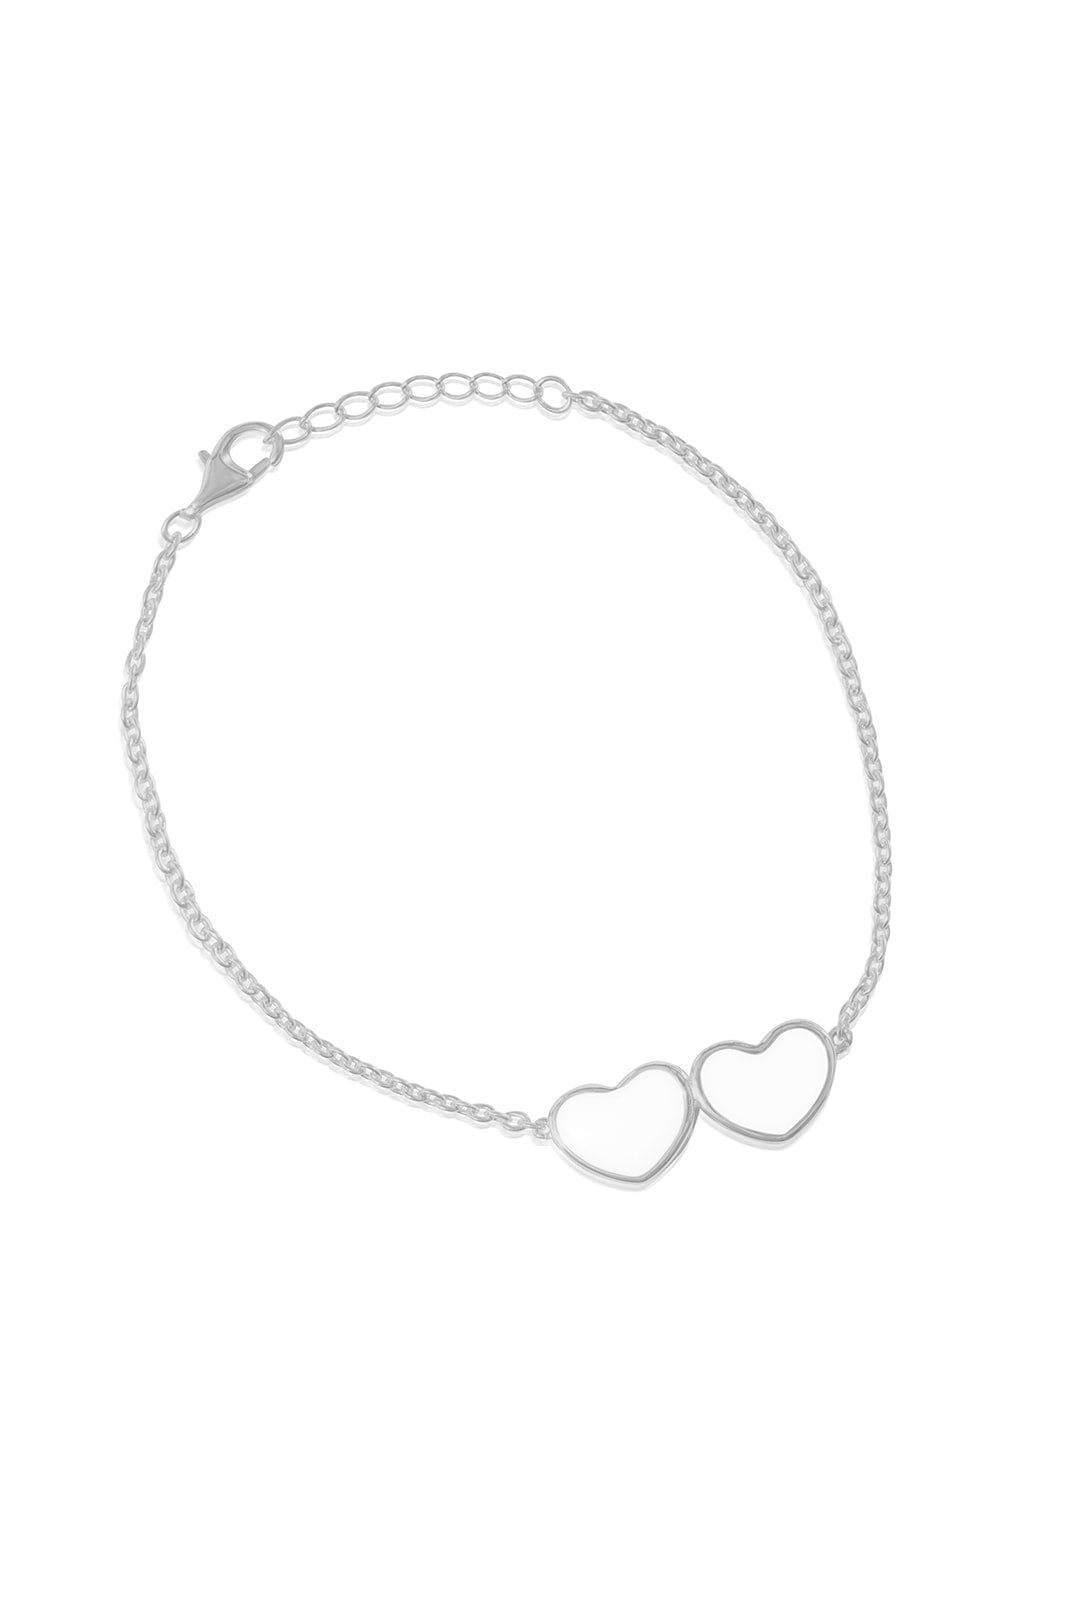 Breastmilk Heart Necklace - White Gold